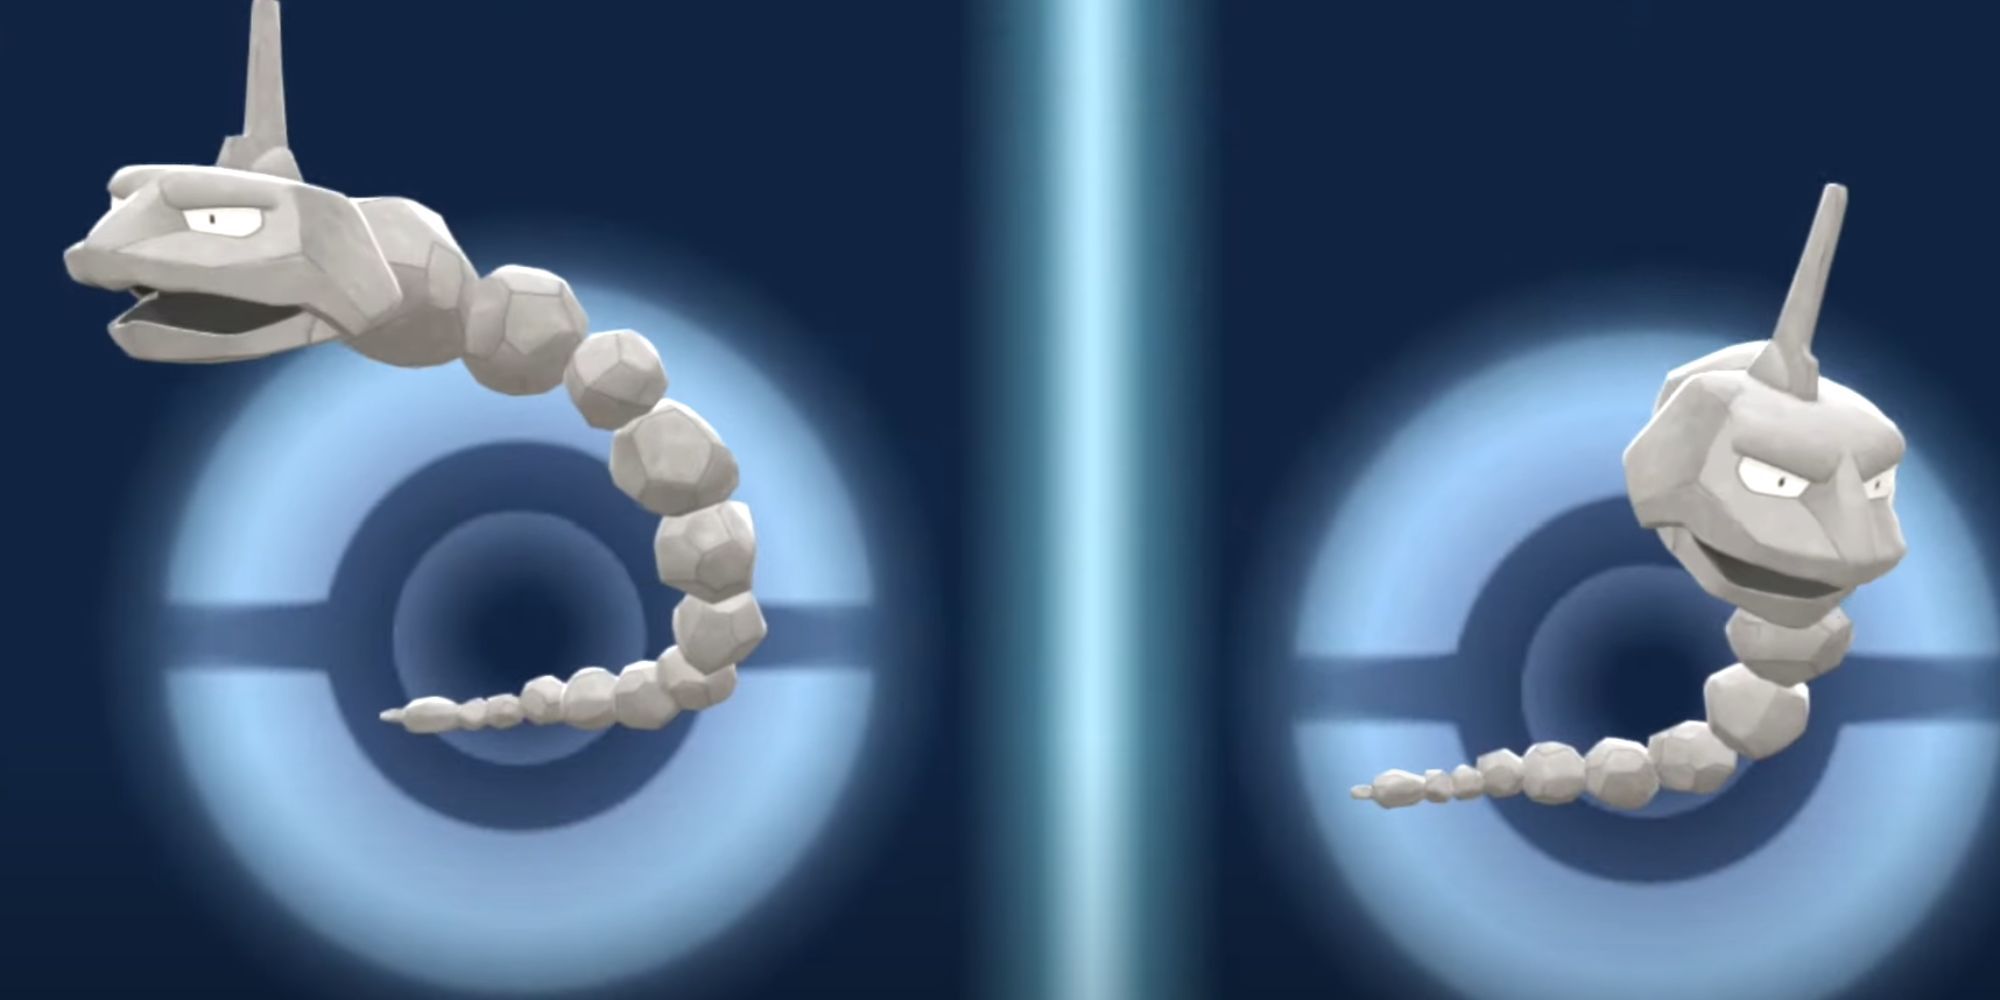 How to evolve Onix into Steelix in Pokémon Brilliant Diamond and Shining  Pearl - Gamepur